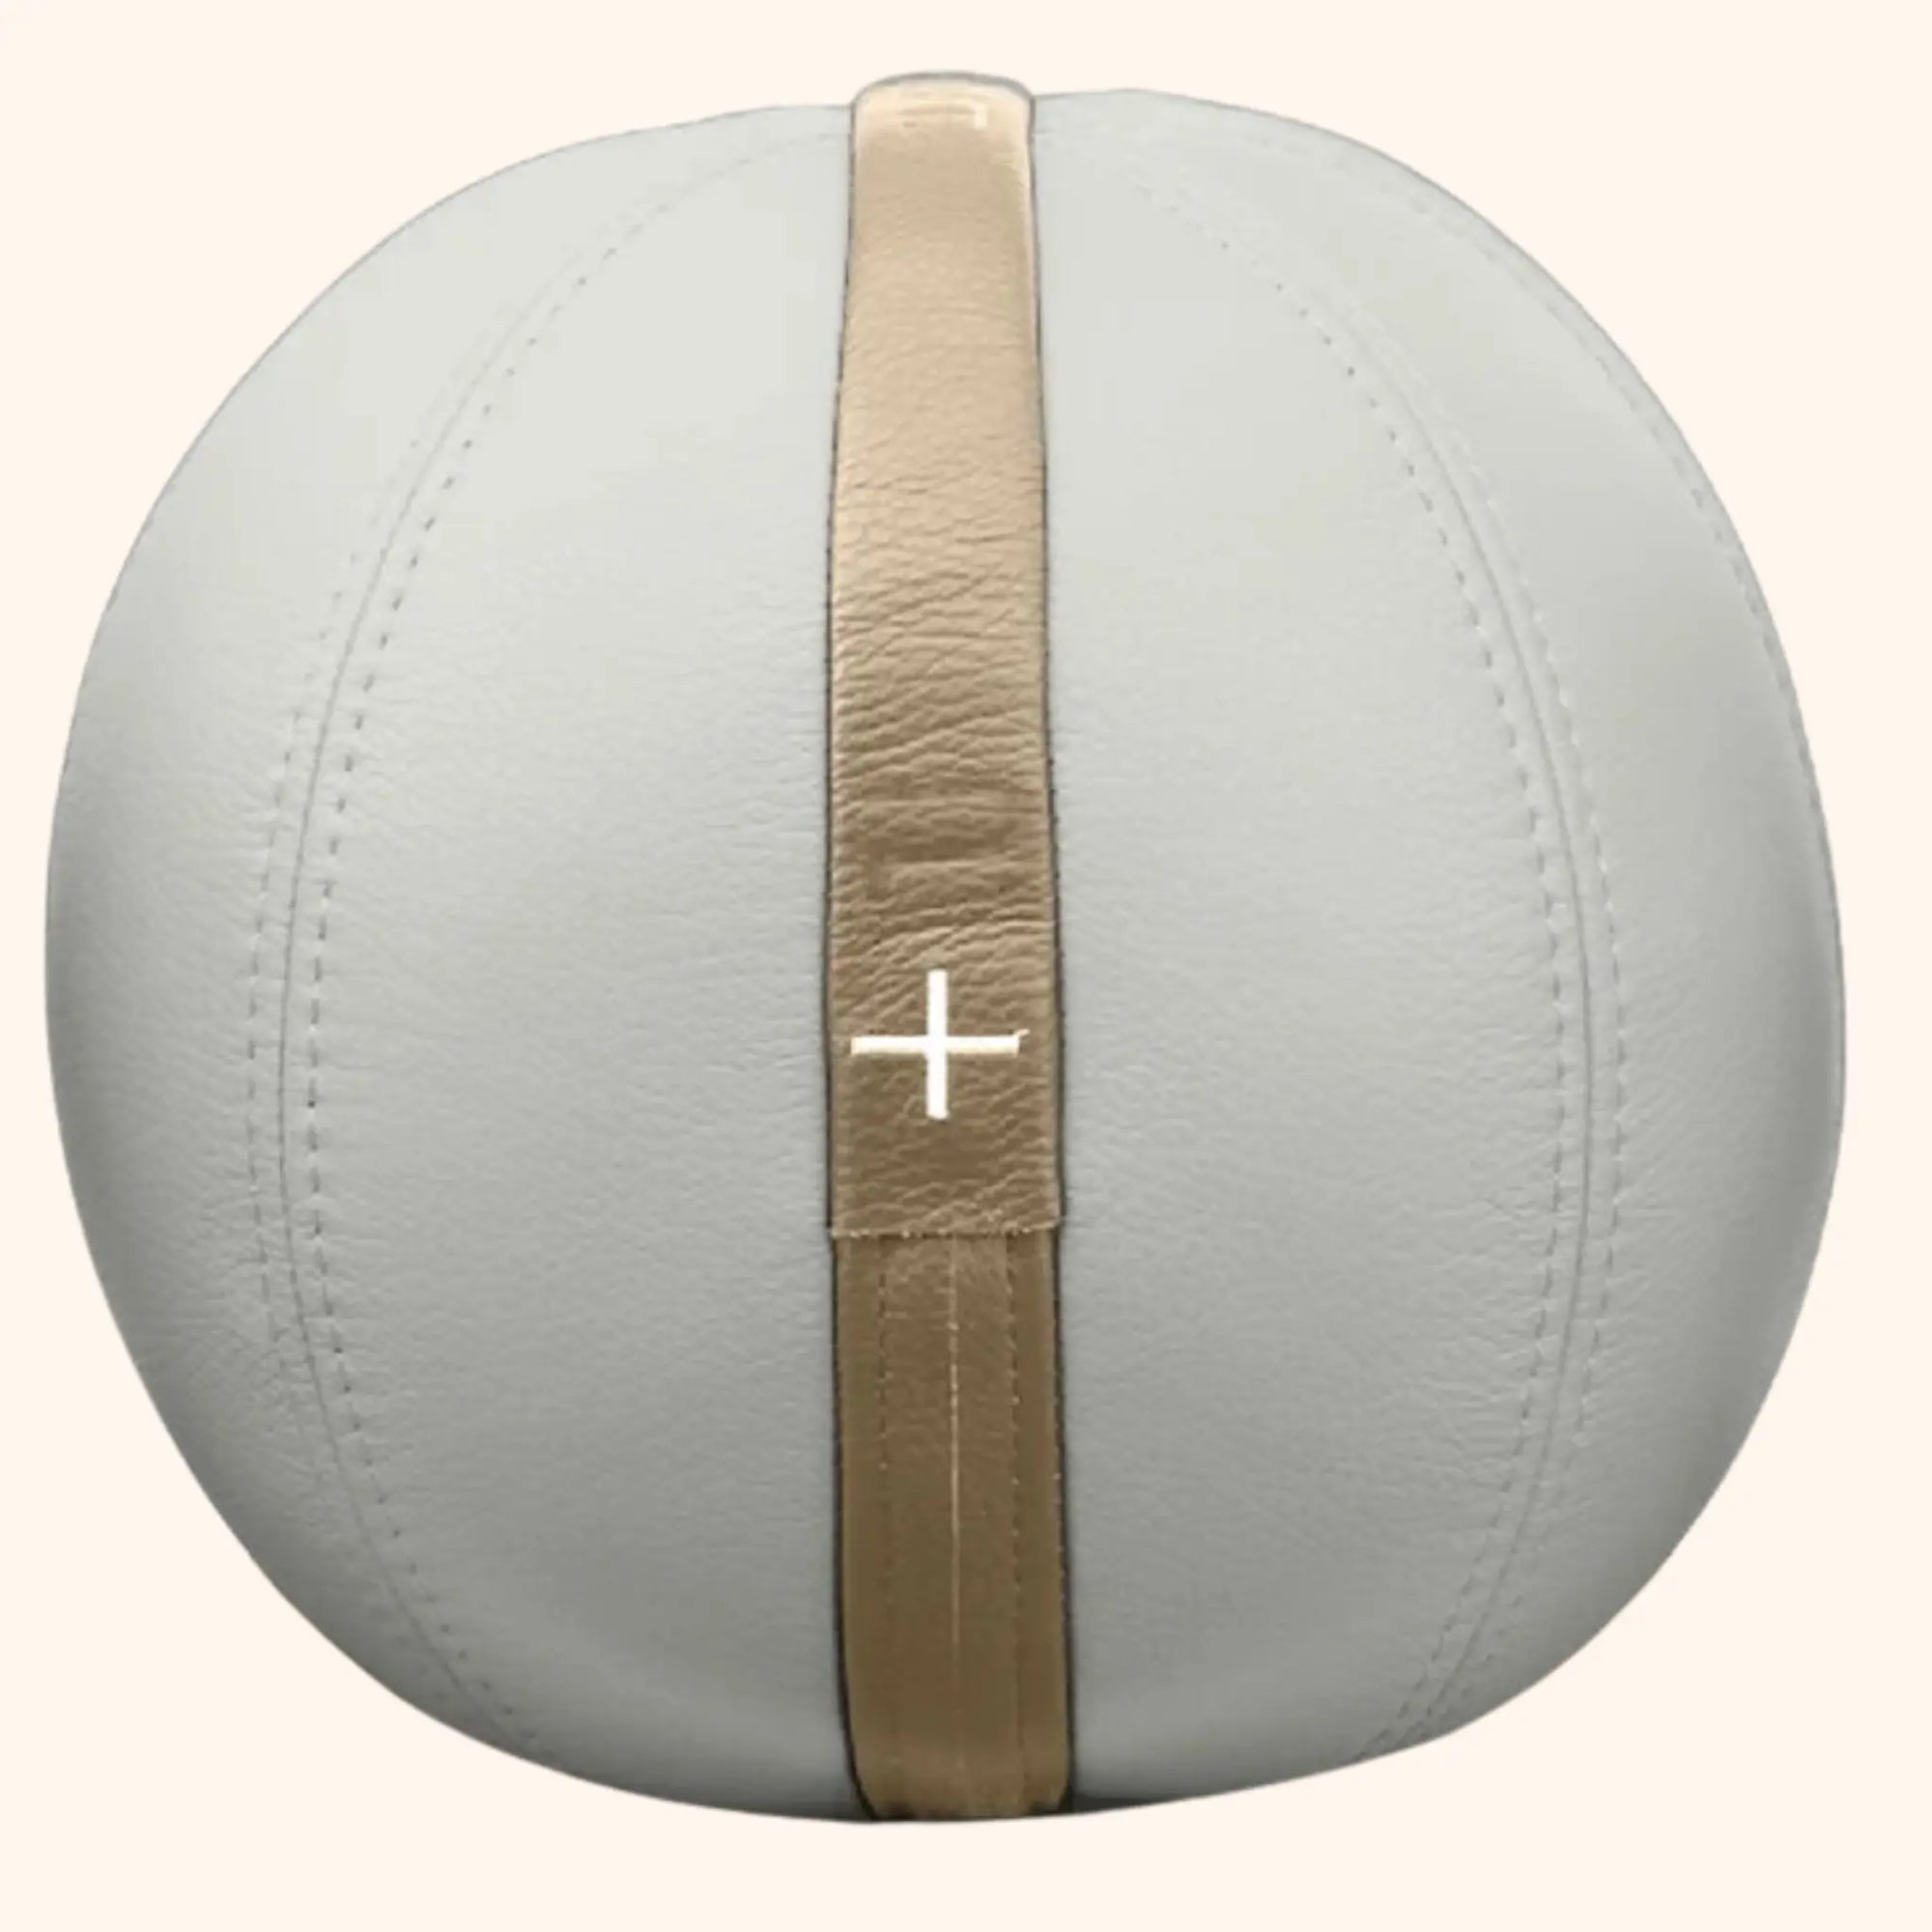 PENT | MOXA Weighted Leather Ball PENT